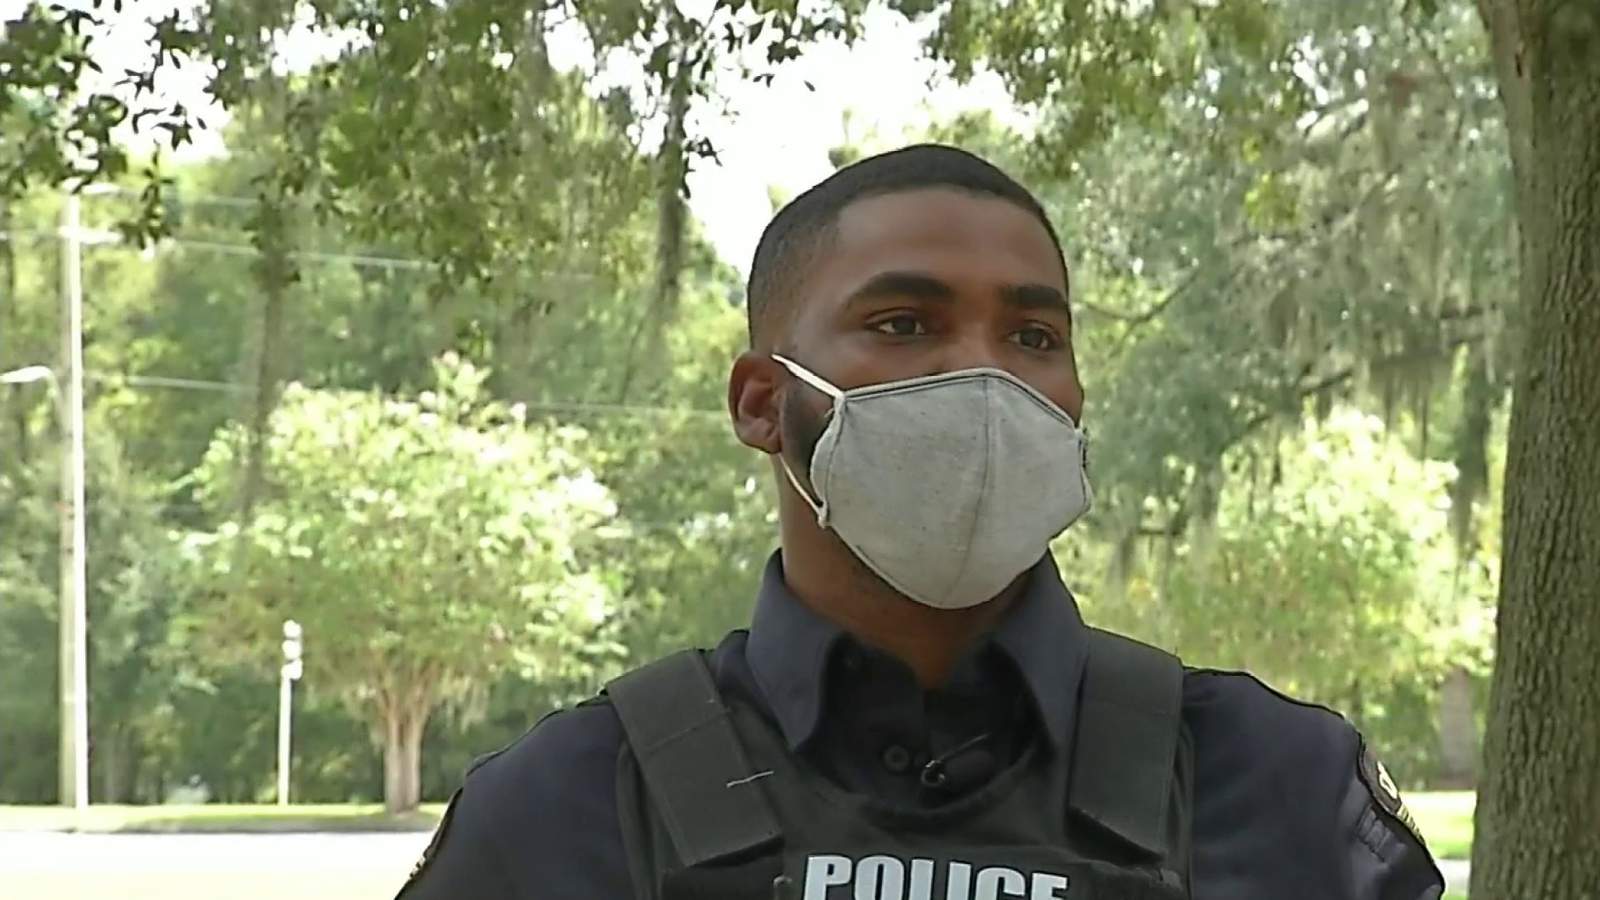 ‘We can understand one another:’ Orlando police officer from Parramore says to troubled teens